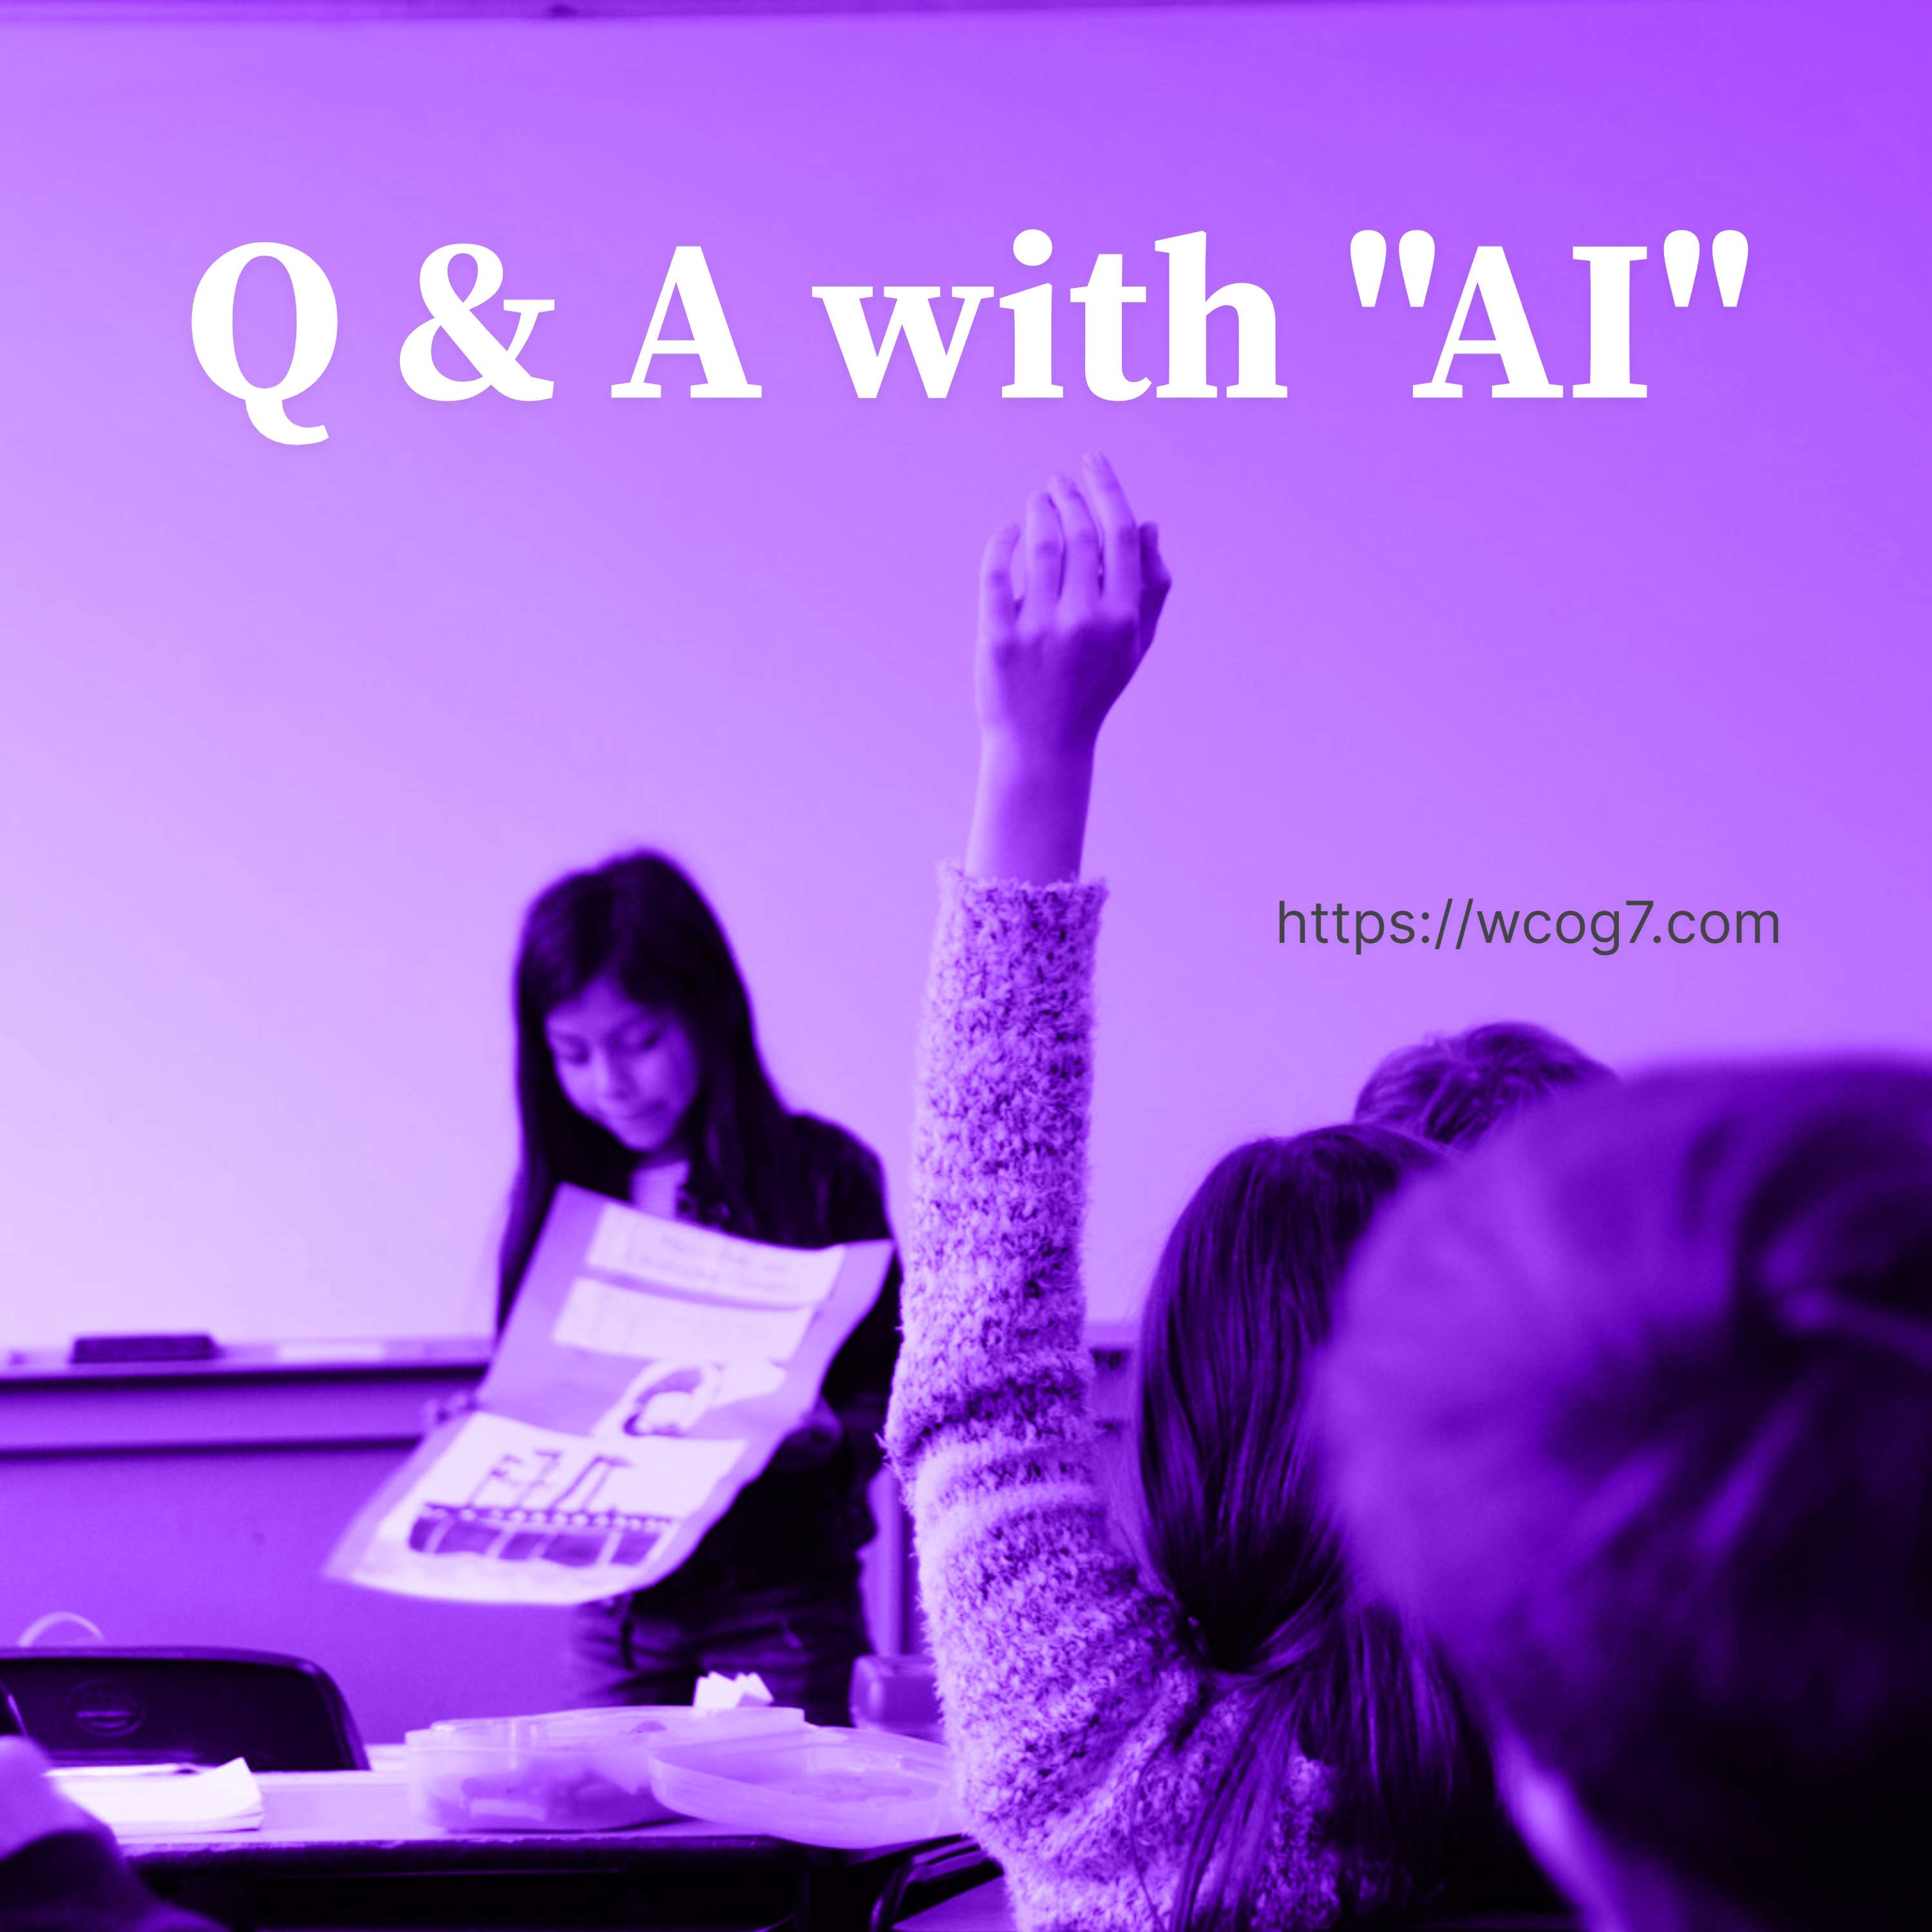 Q & A With "AI"